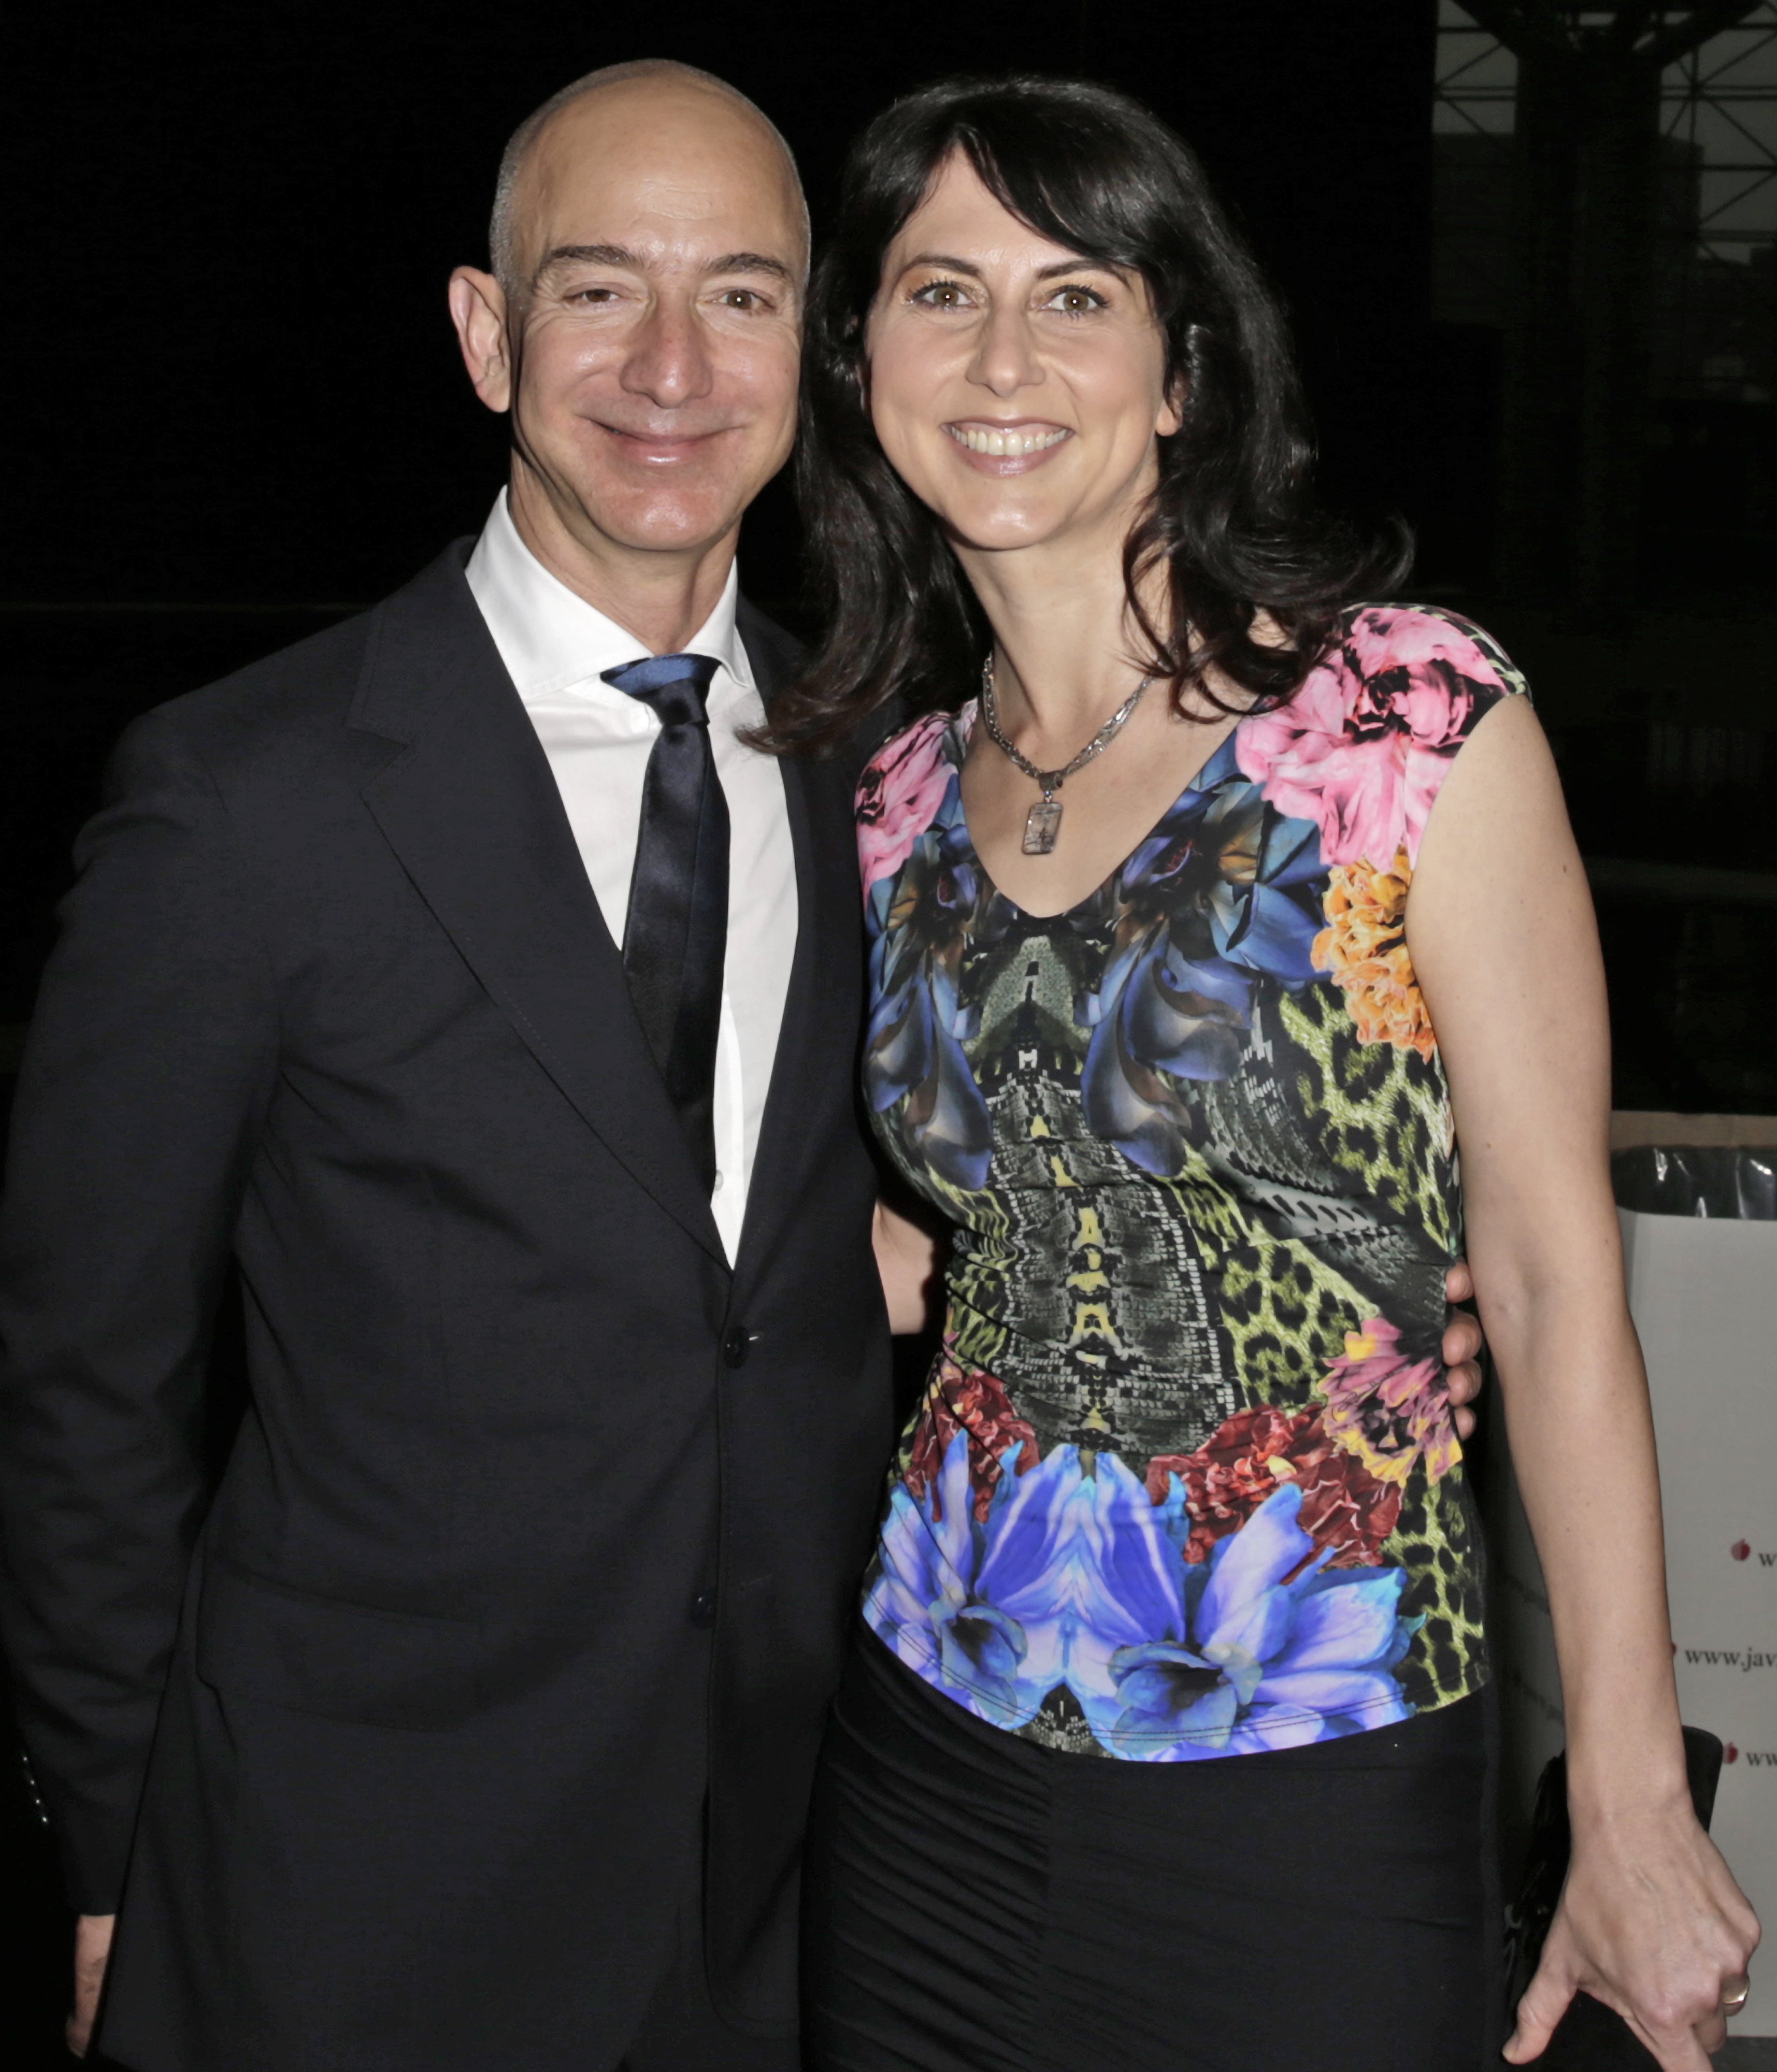 Jeff Bezos and Mackenzie Scott pose for a picture as they arrive at the Robin Hood Foundation's annual benefit on May 12, 2014, in New York City | Source: Getty Images